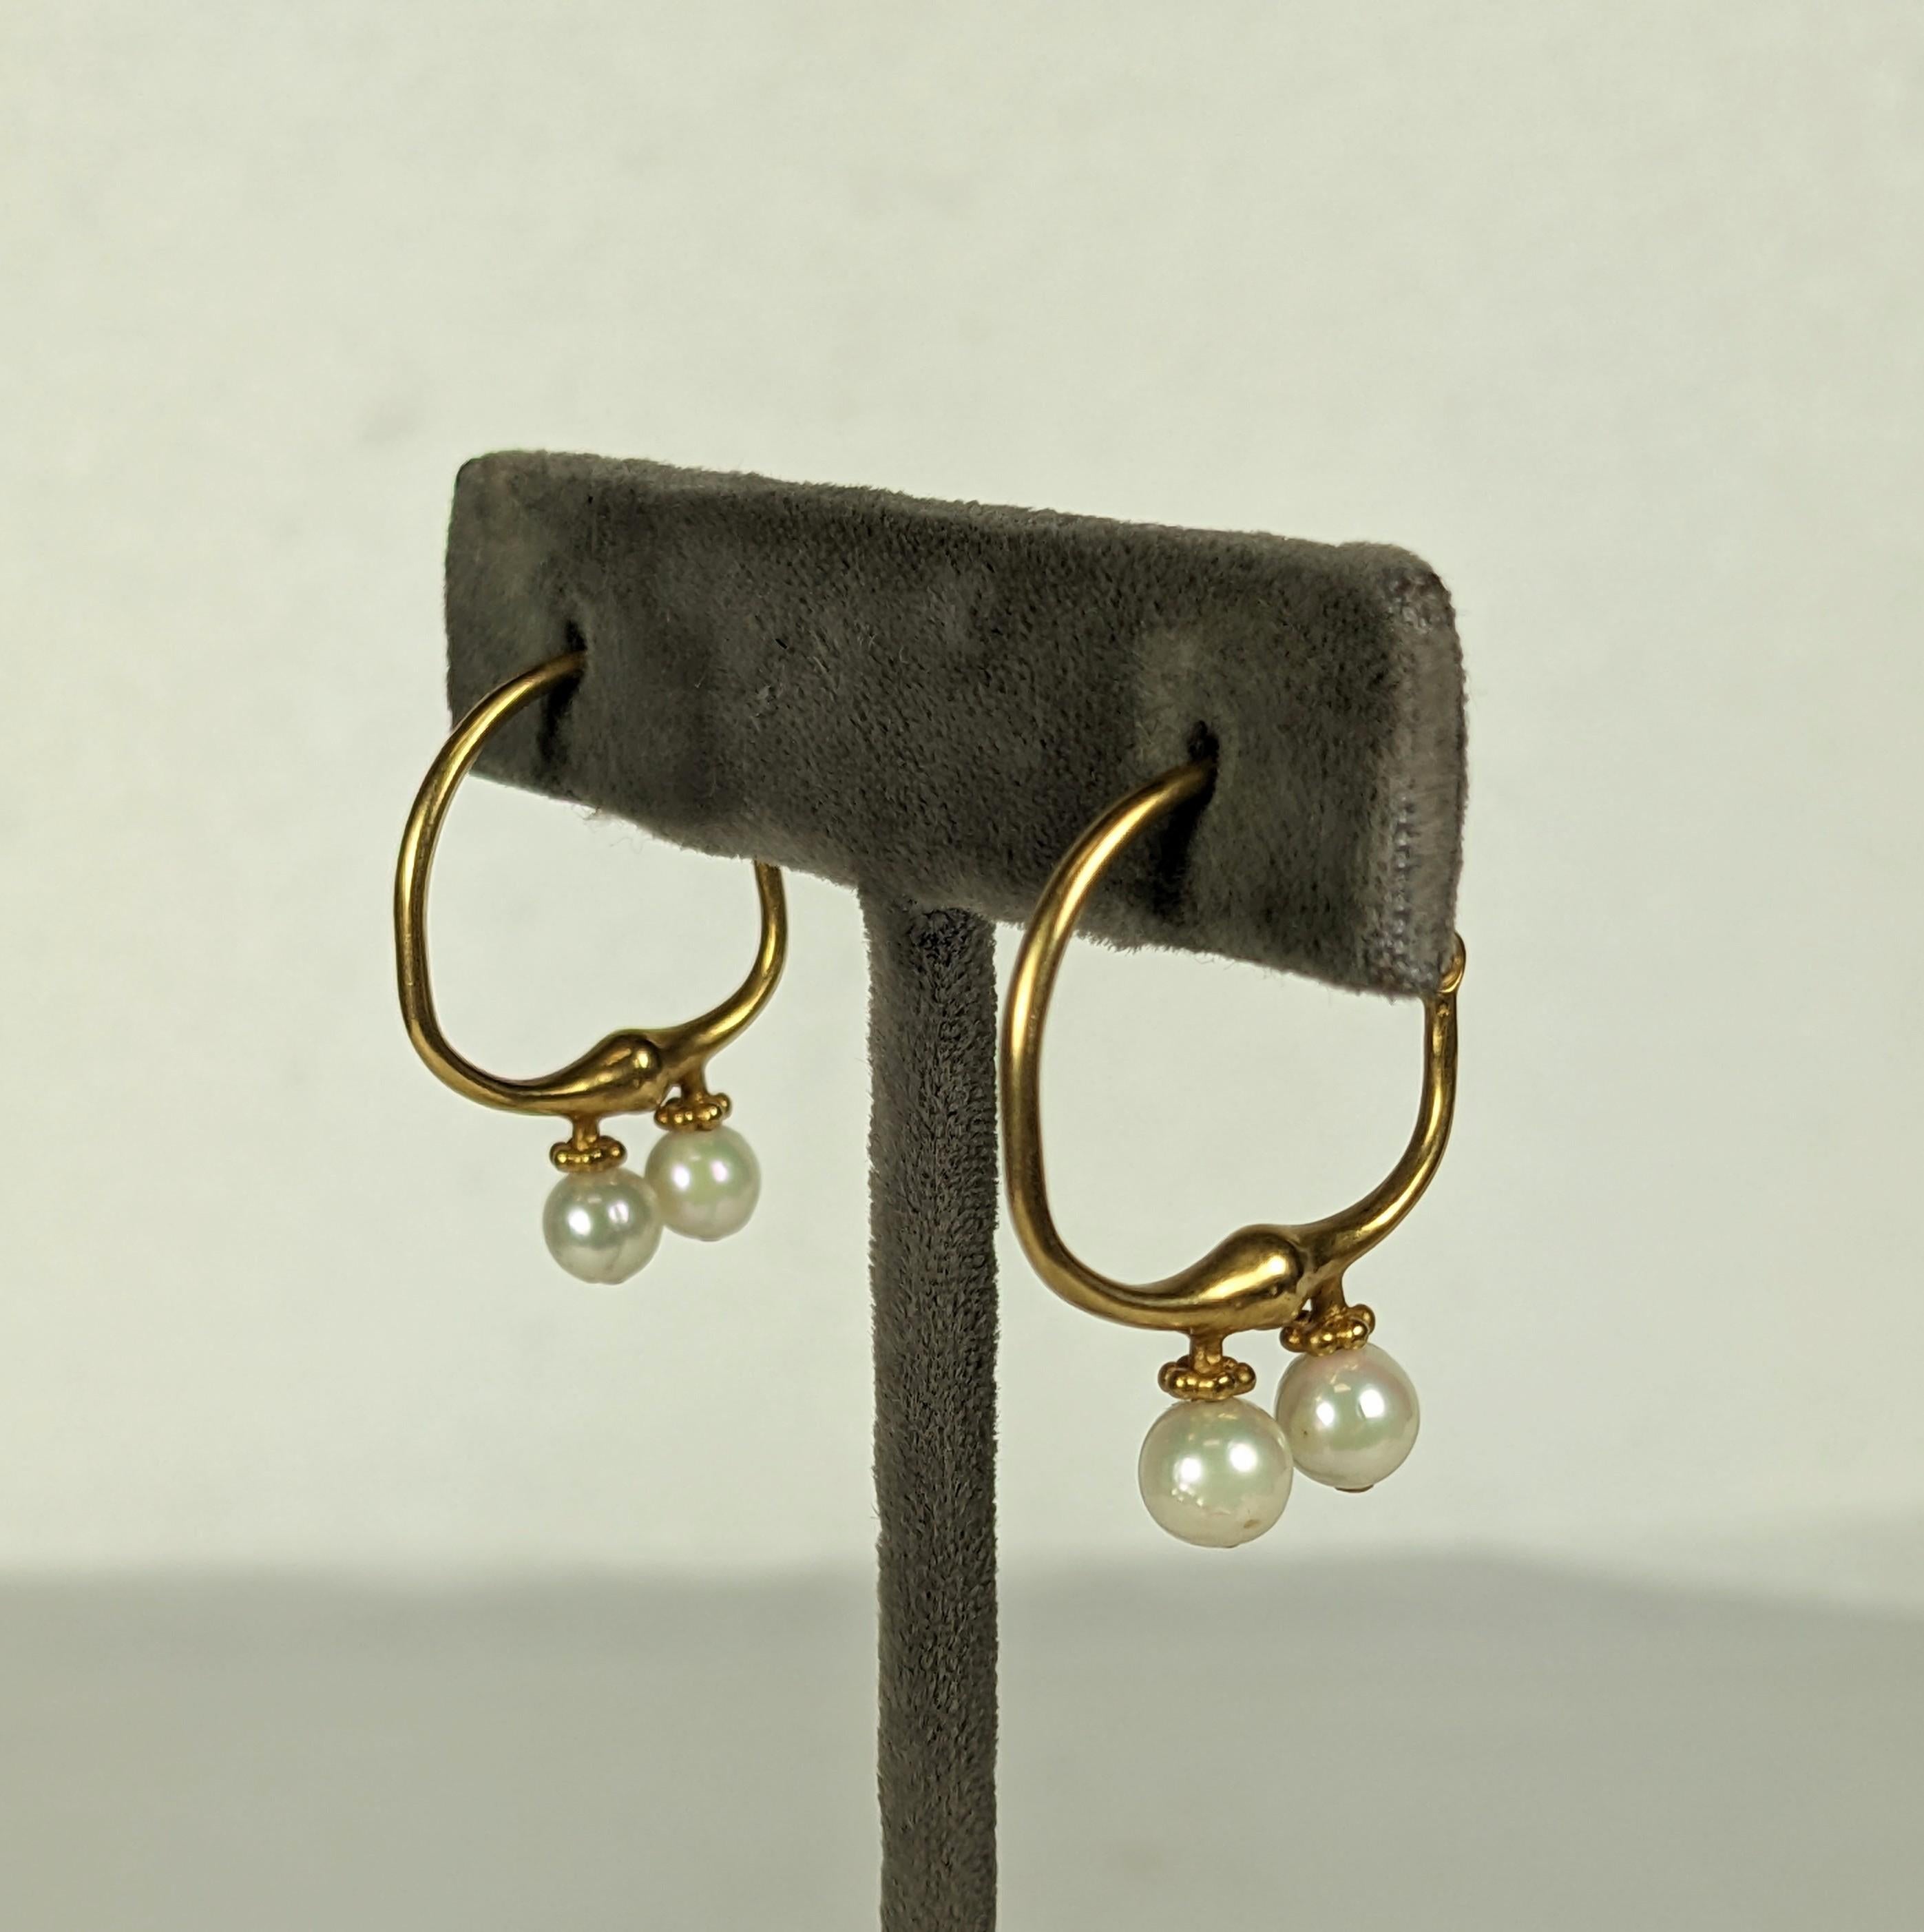 Elegant Artisanal Gold and Pearl Hoop Earrings In Excellent Condition For Sale In New York, NY